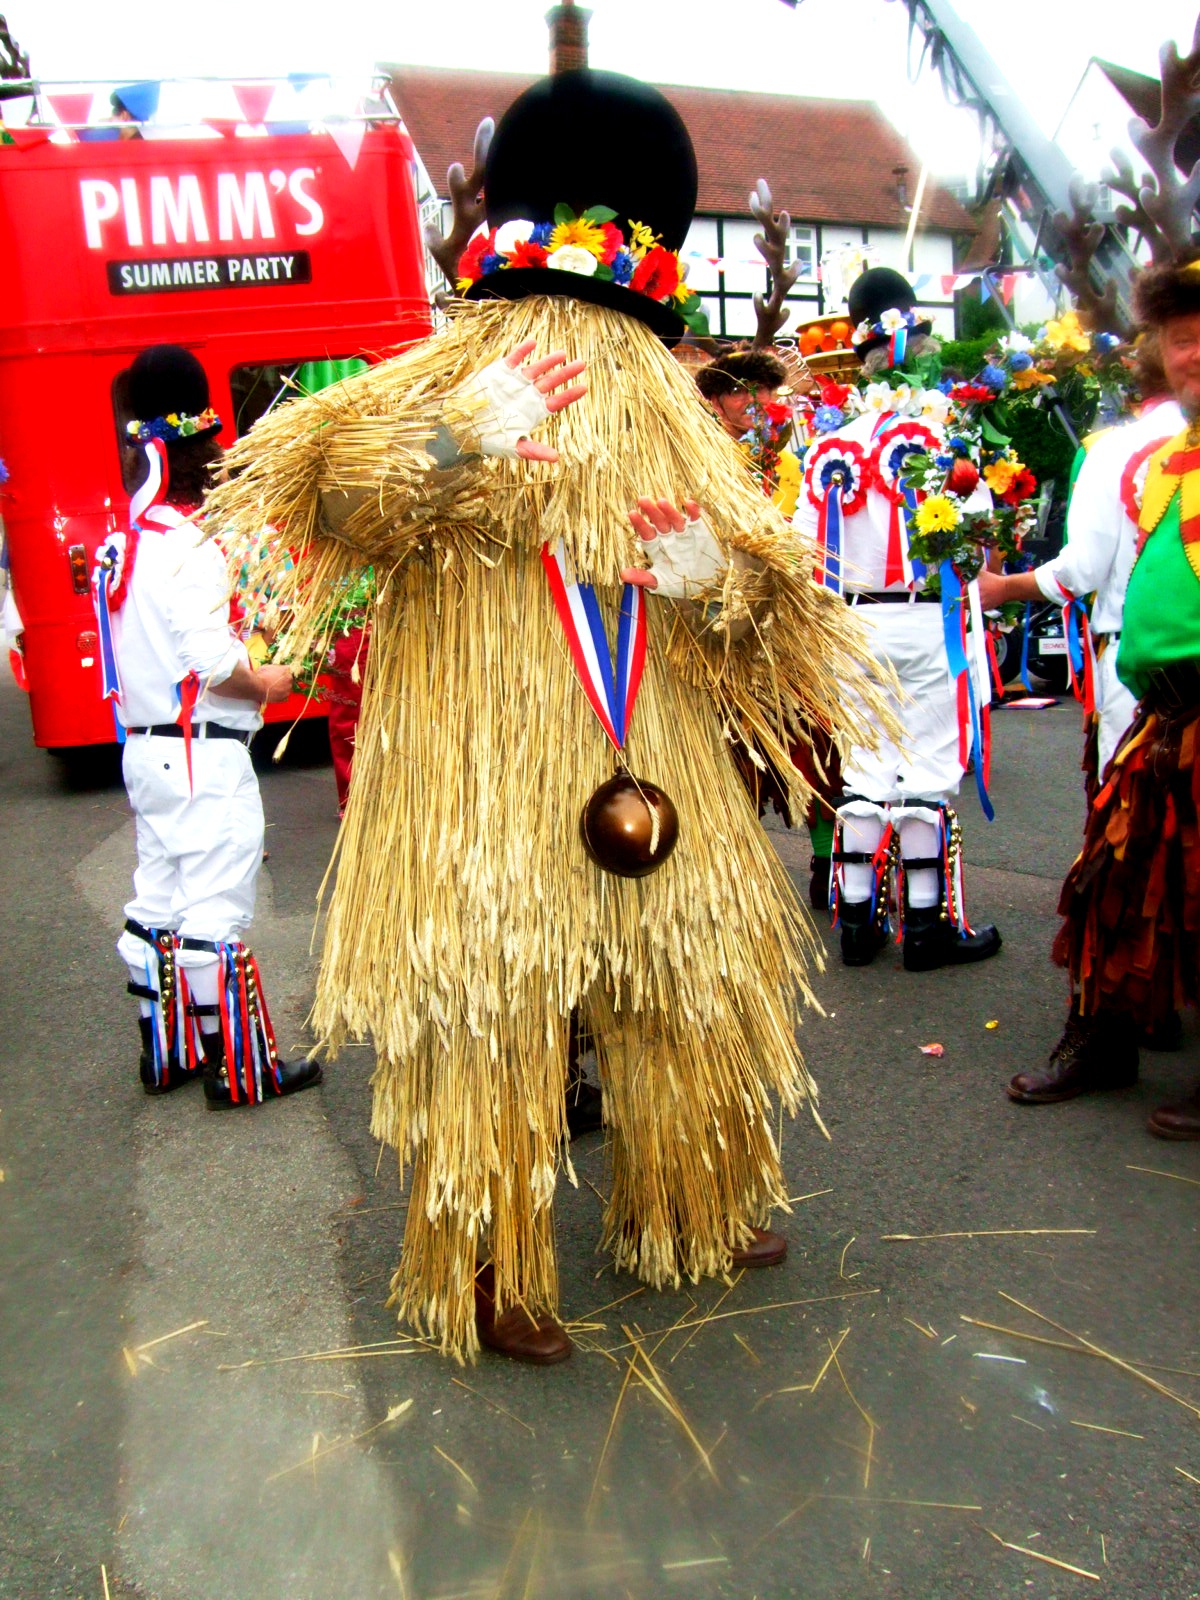 'Pimm's Summer Party' The new TV ad features theStraw Bear (Straw man) Played by Christian Wolf-LaMoy Pimms summer party bus touring the country and recruiting the public to Join the Pimms Summer Party.